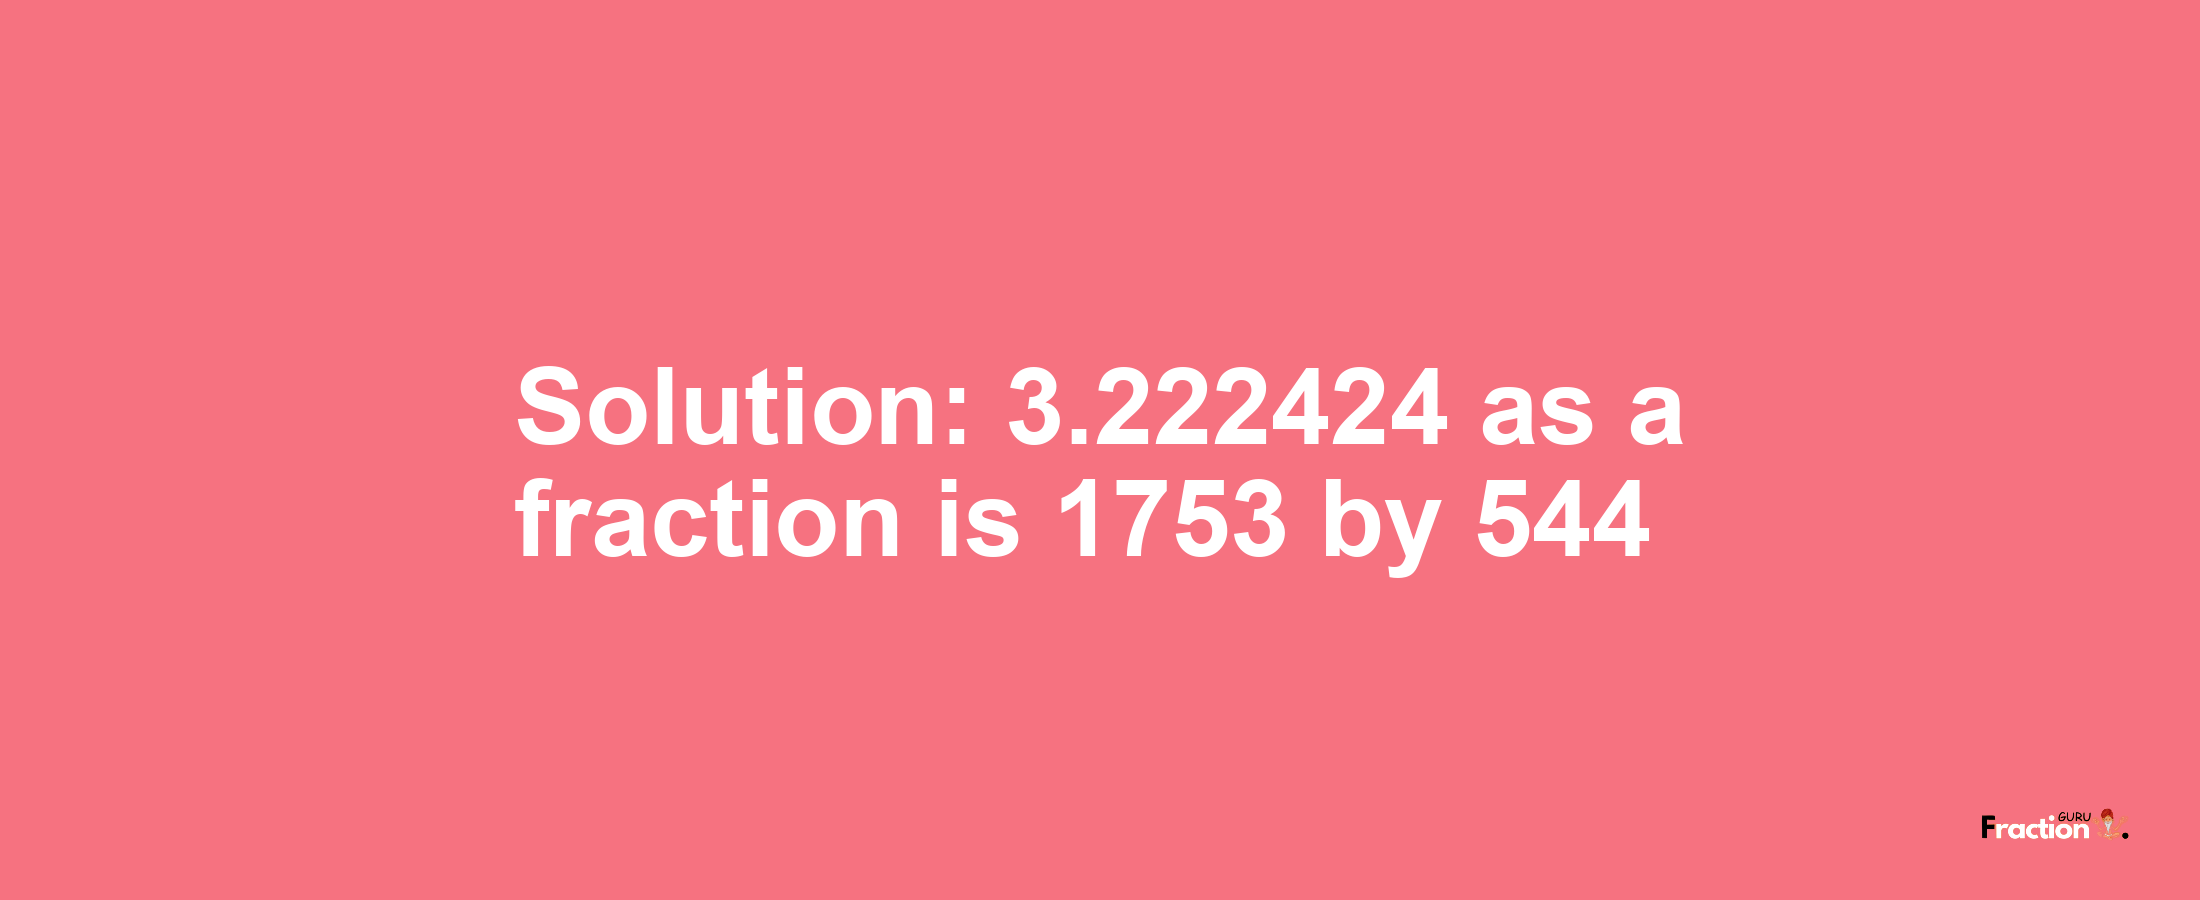 Solution:3.222424 as a fraction is 1753/544